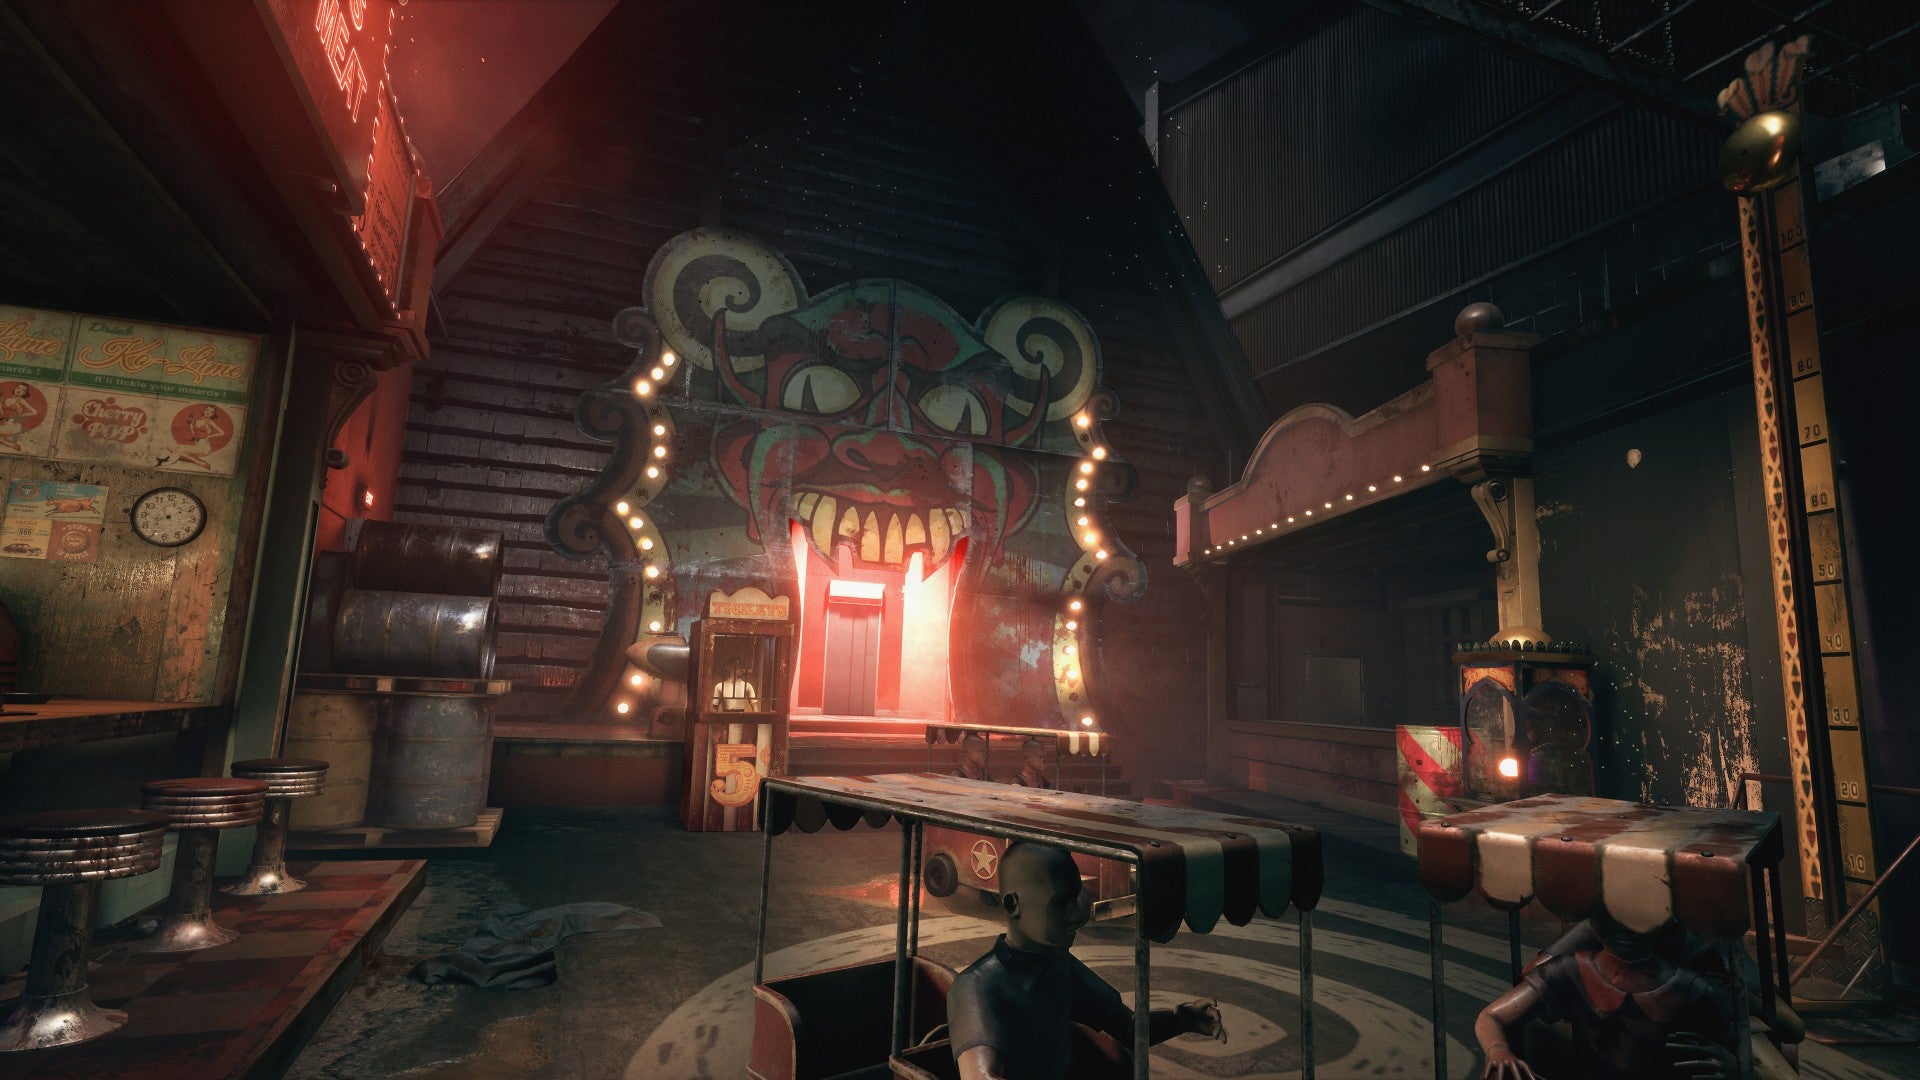 The Outlast Trials screenshot showing mannequins riding in caddies around a fairground-themed room.